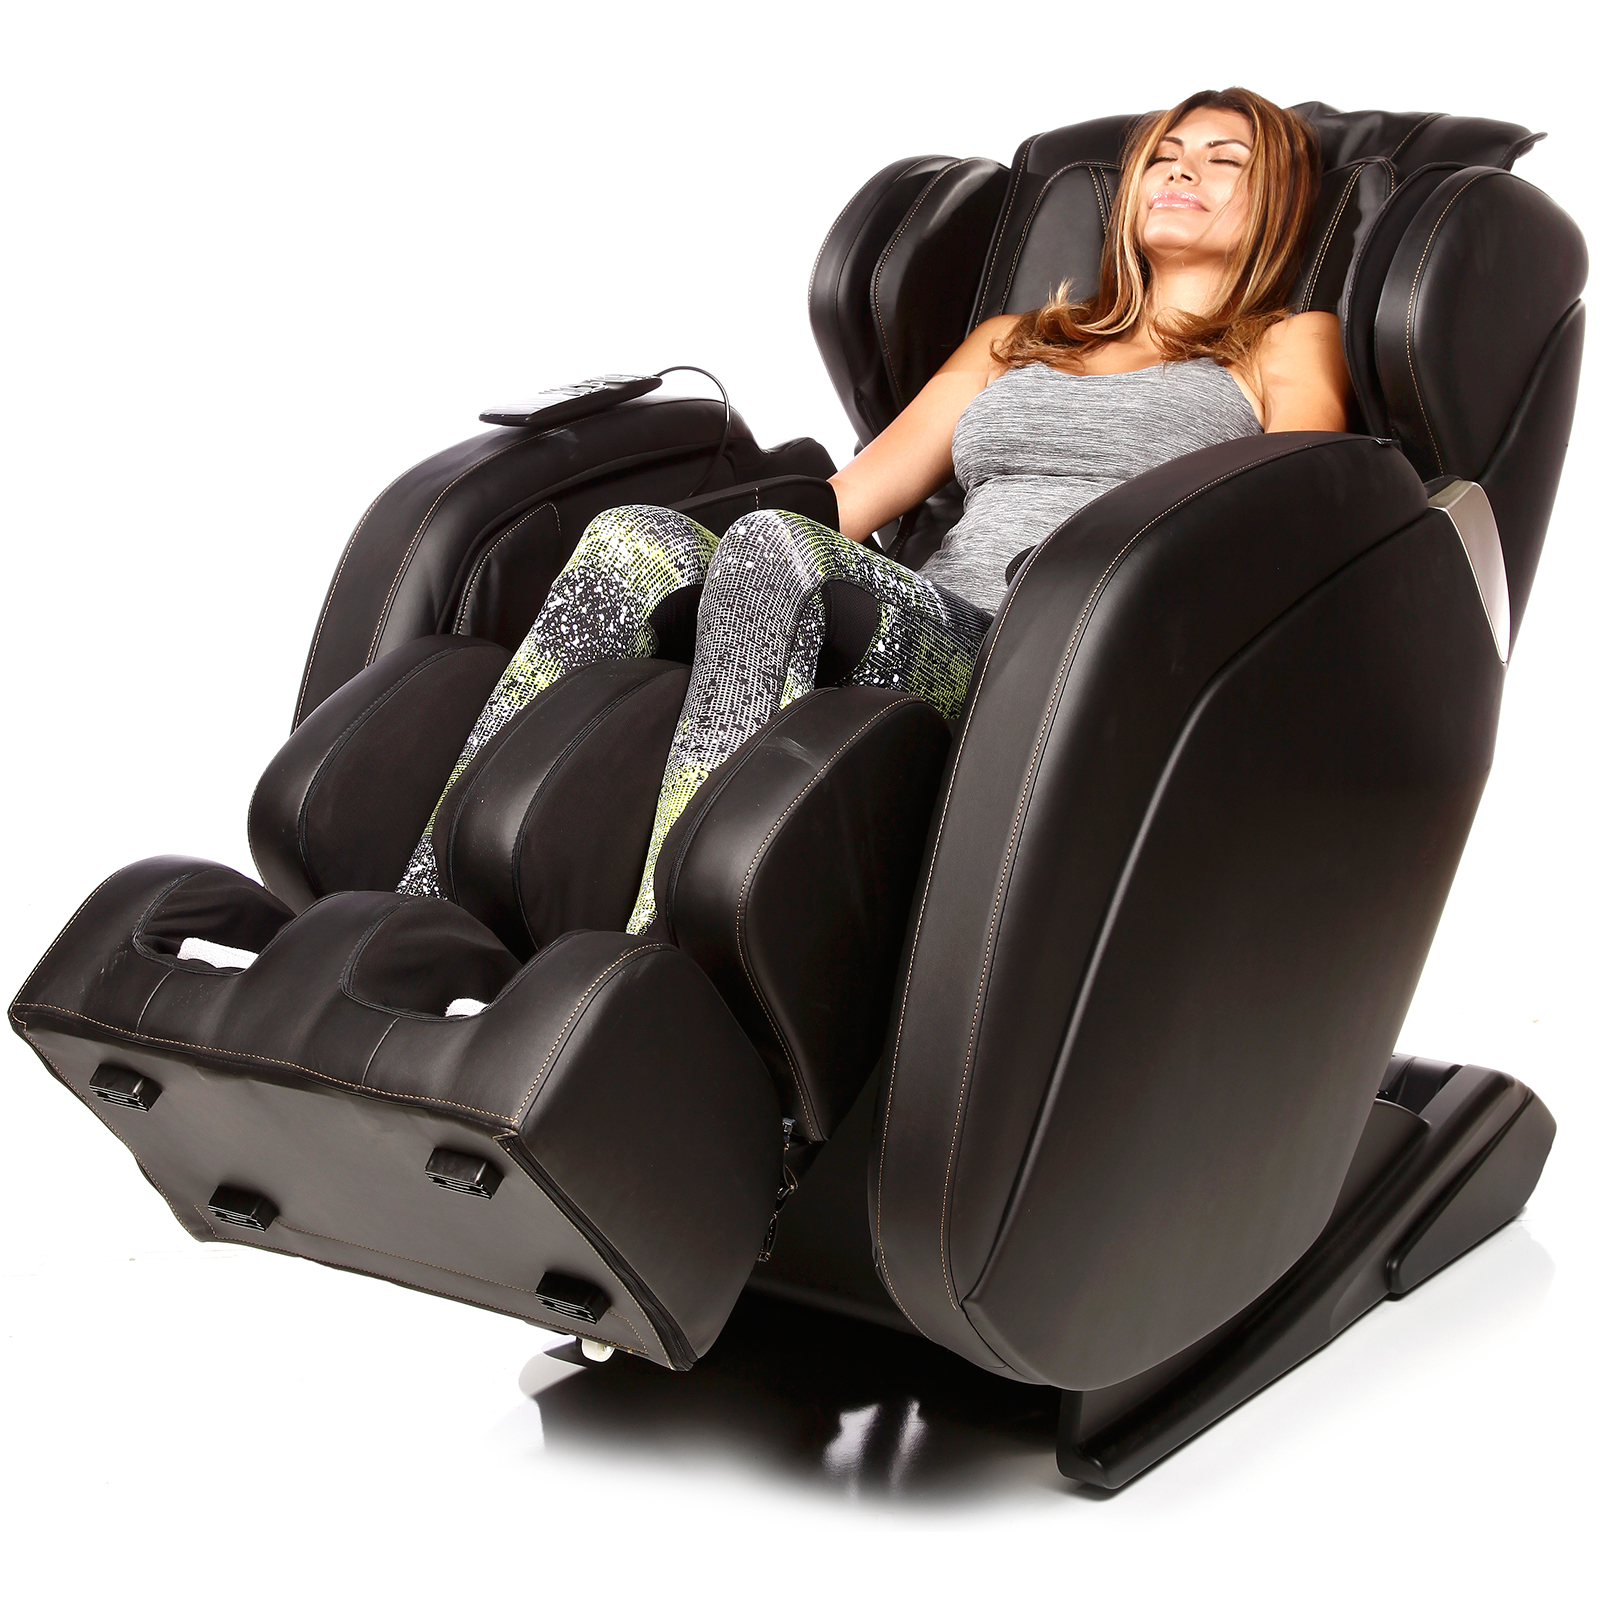 Tips On Buying Pre Owned Robotic Massage Chair